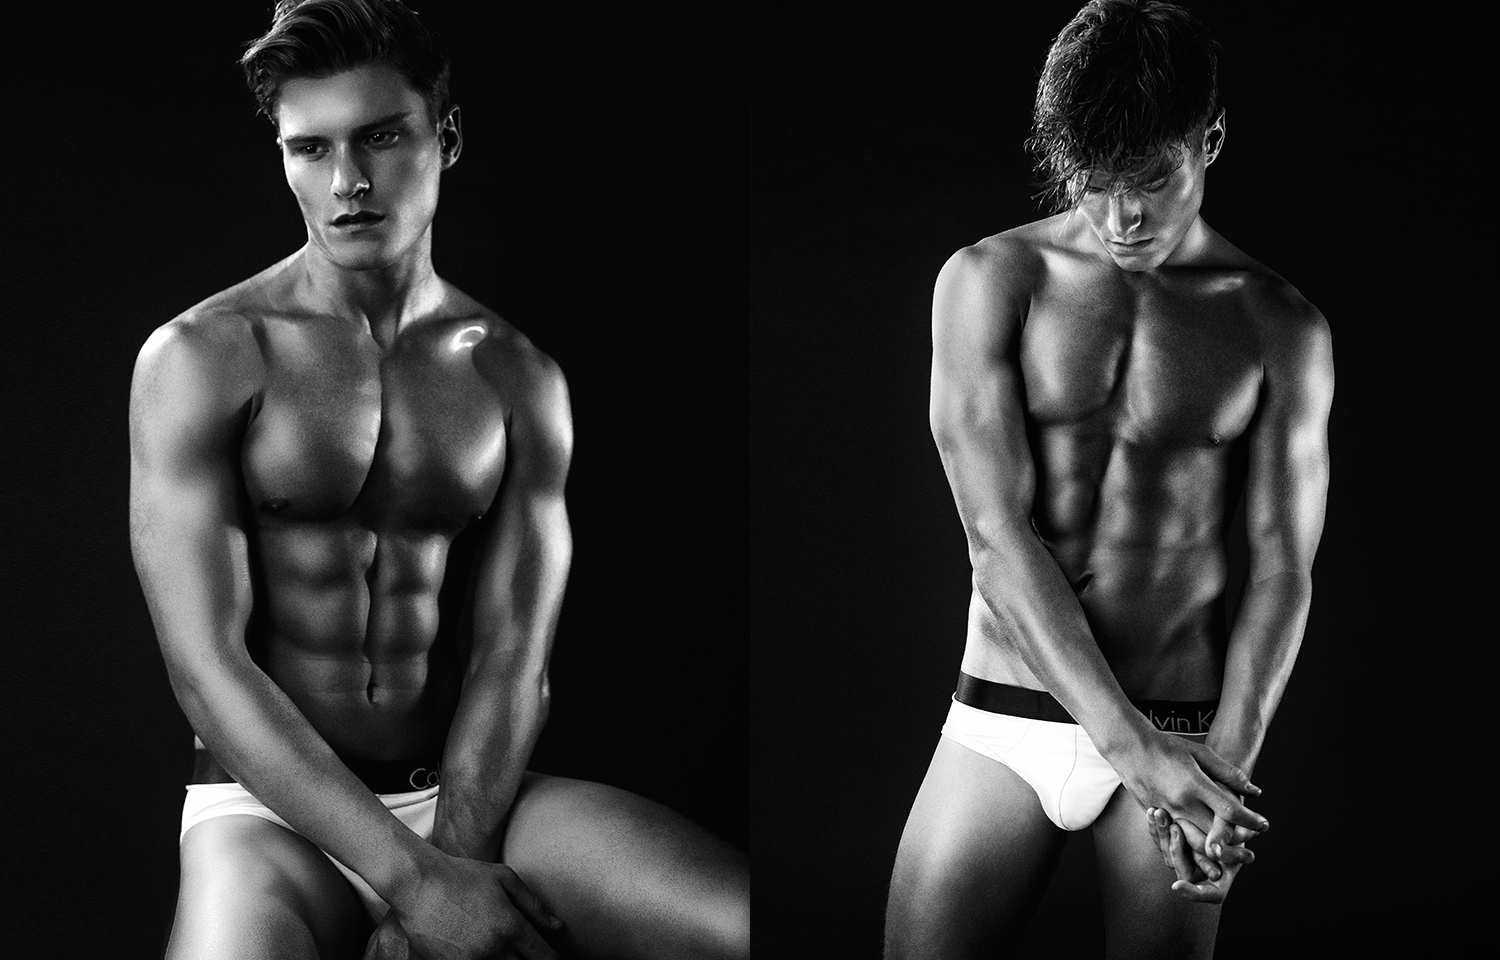 Oliver Cheshire nudes